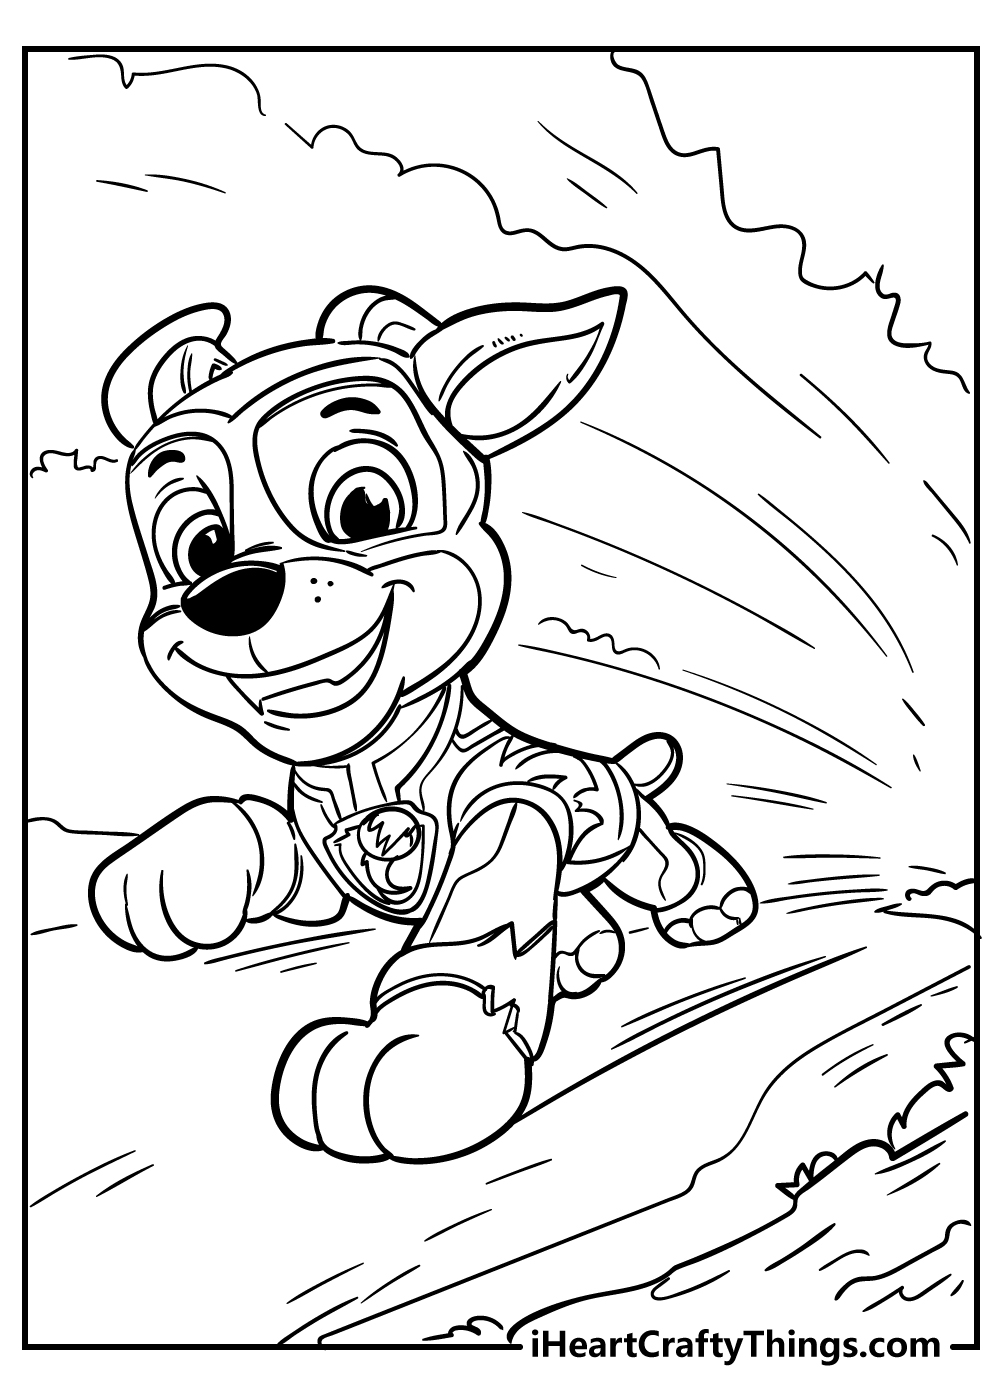 Paw Patrol Coloring Pages Updated 20